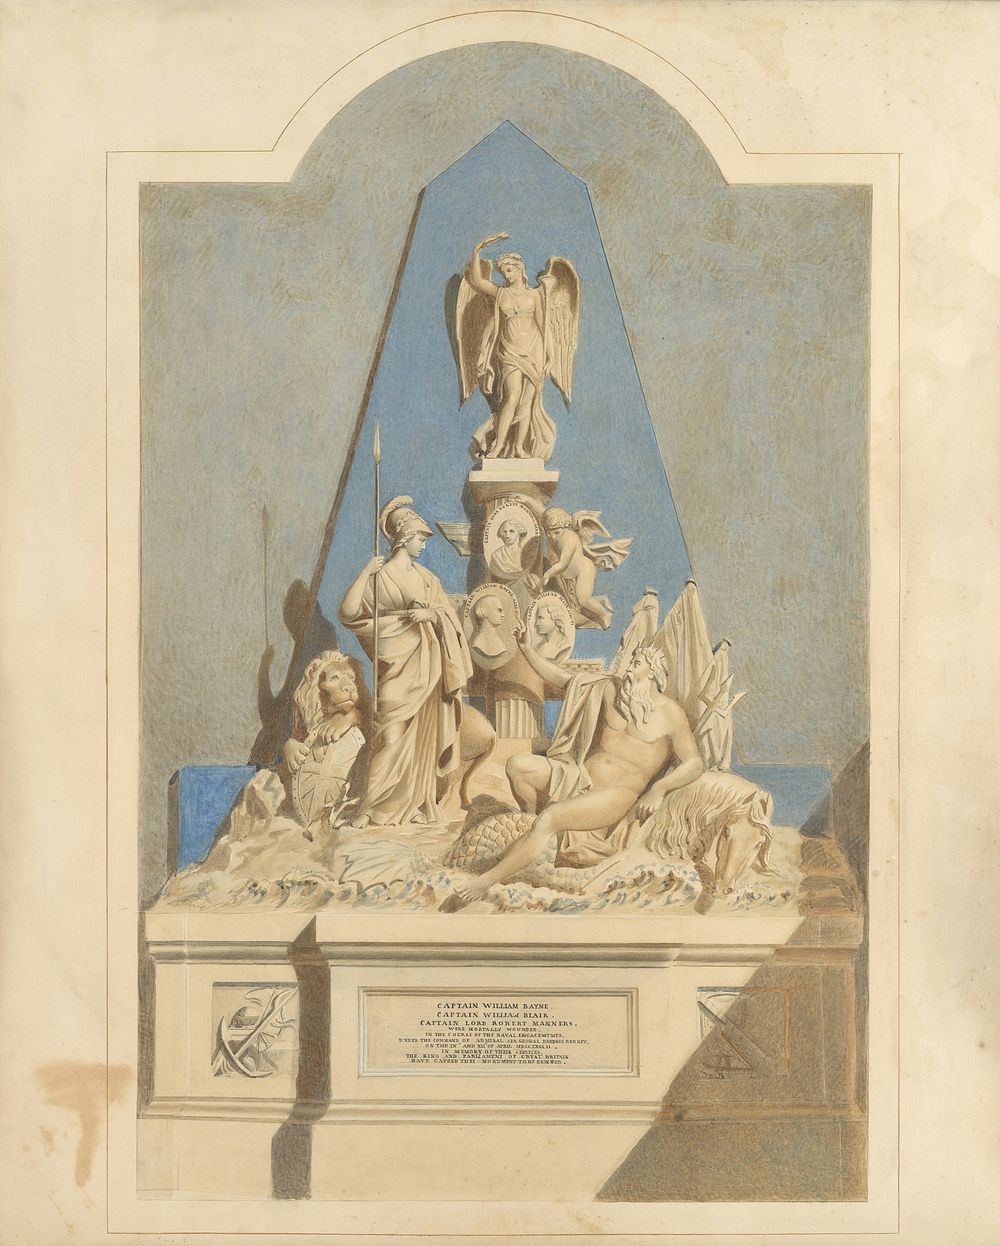 Design for "The Three Captains Memorial" by Various artists/makers